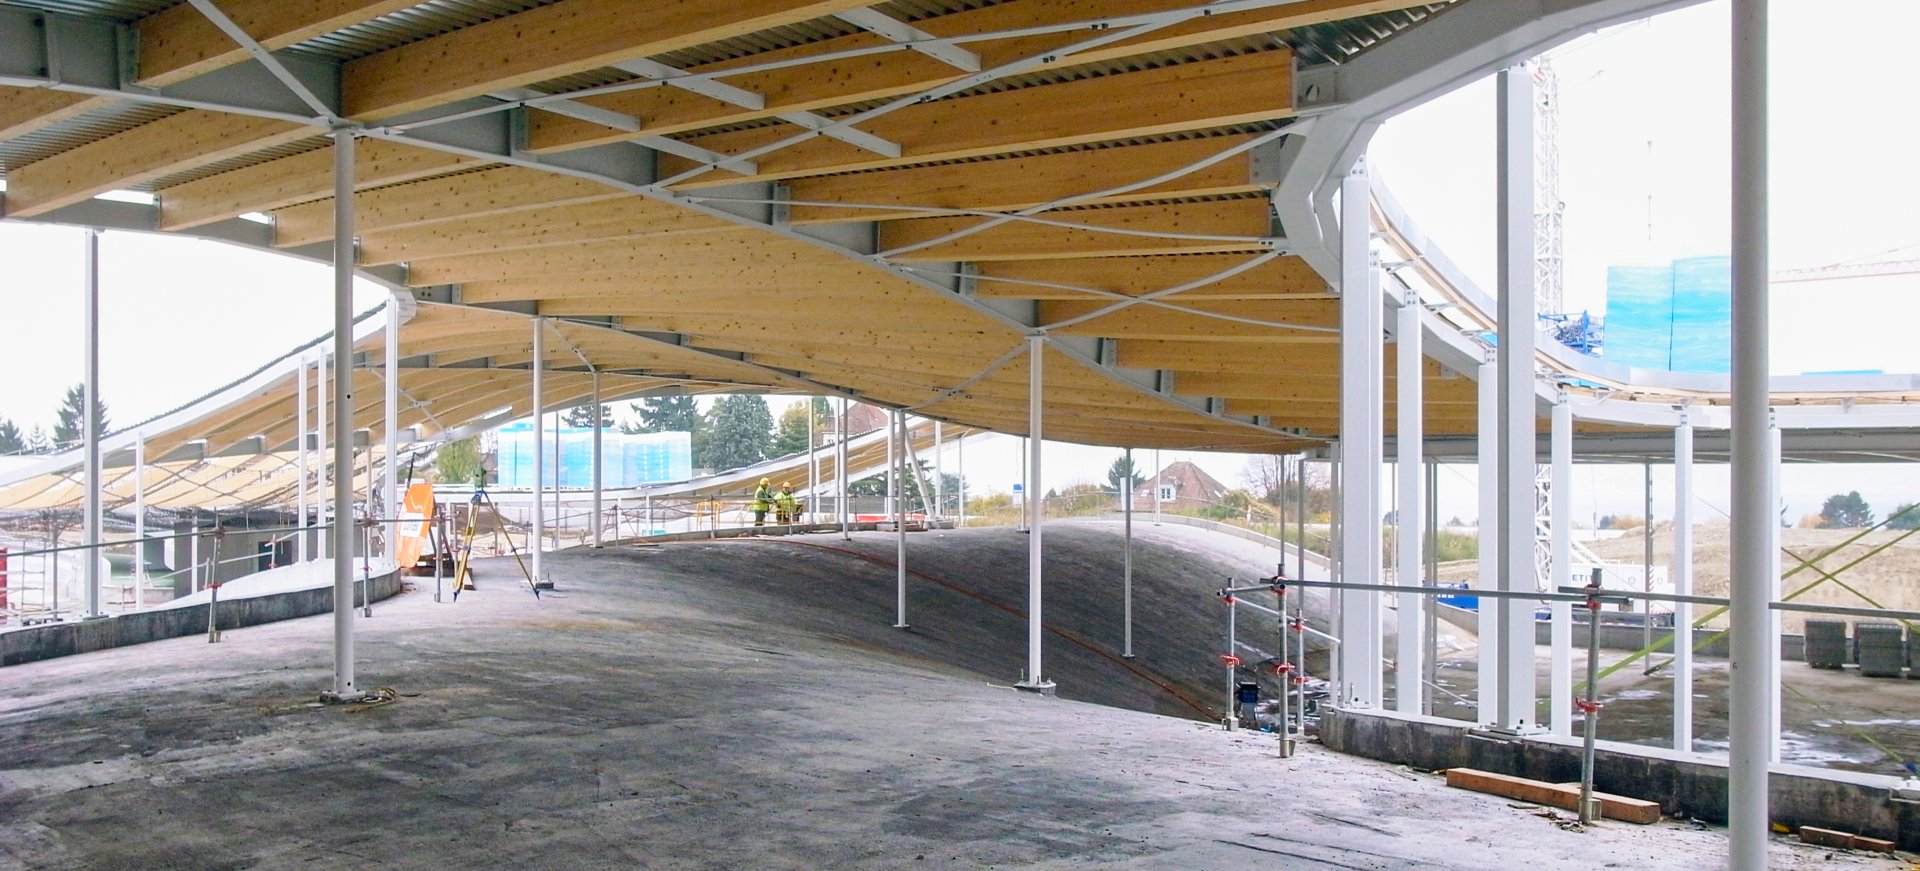 EPFL Rolex-Learning Center, large shell with its steel and timber roof during installation